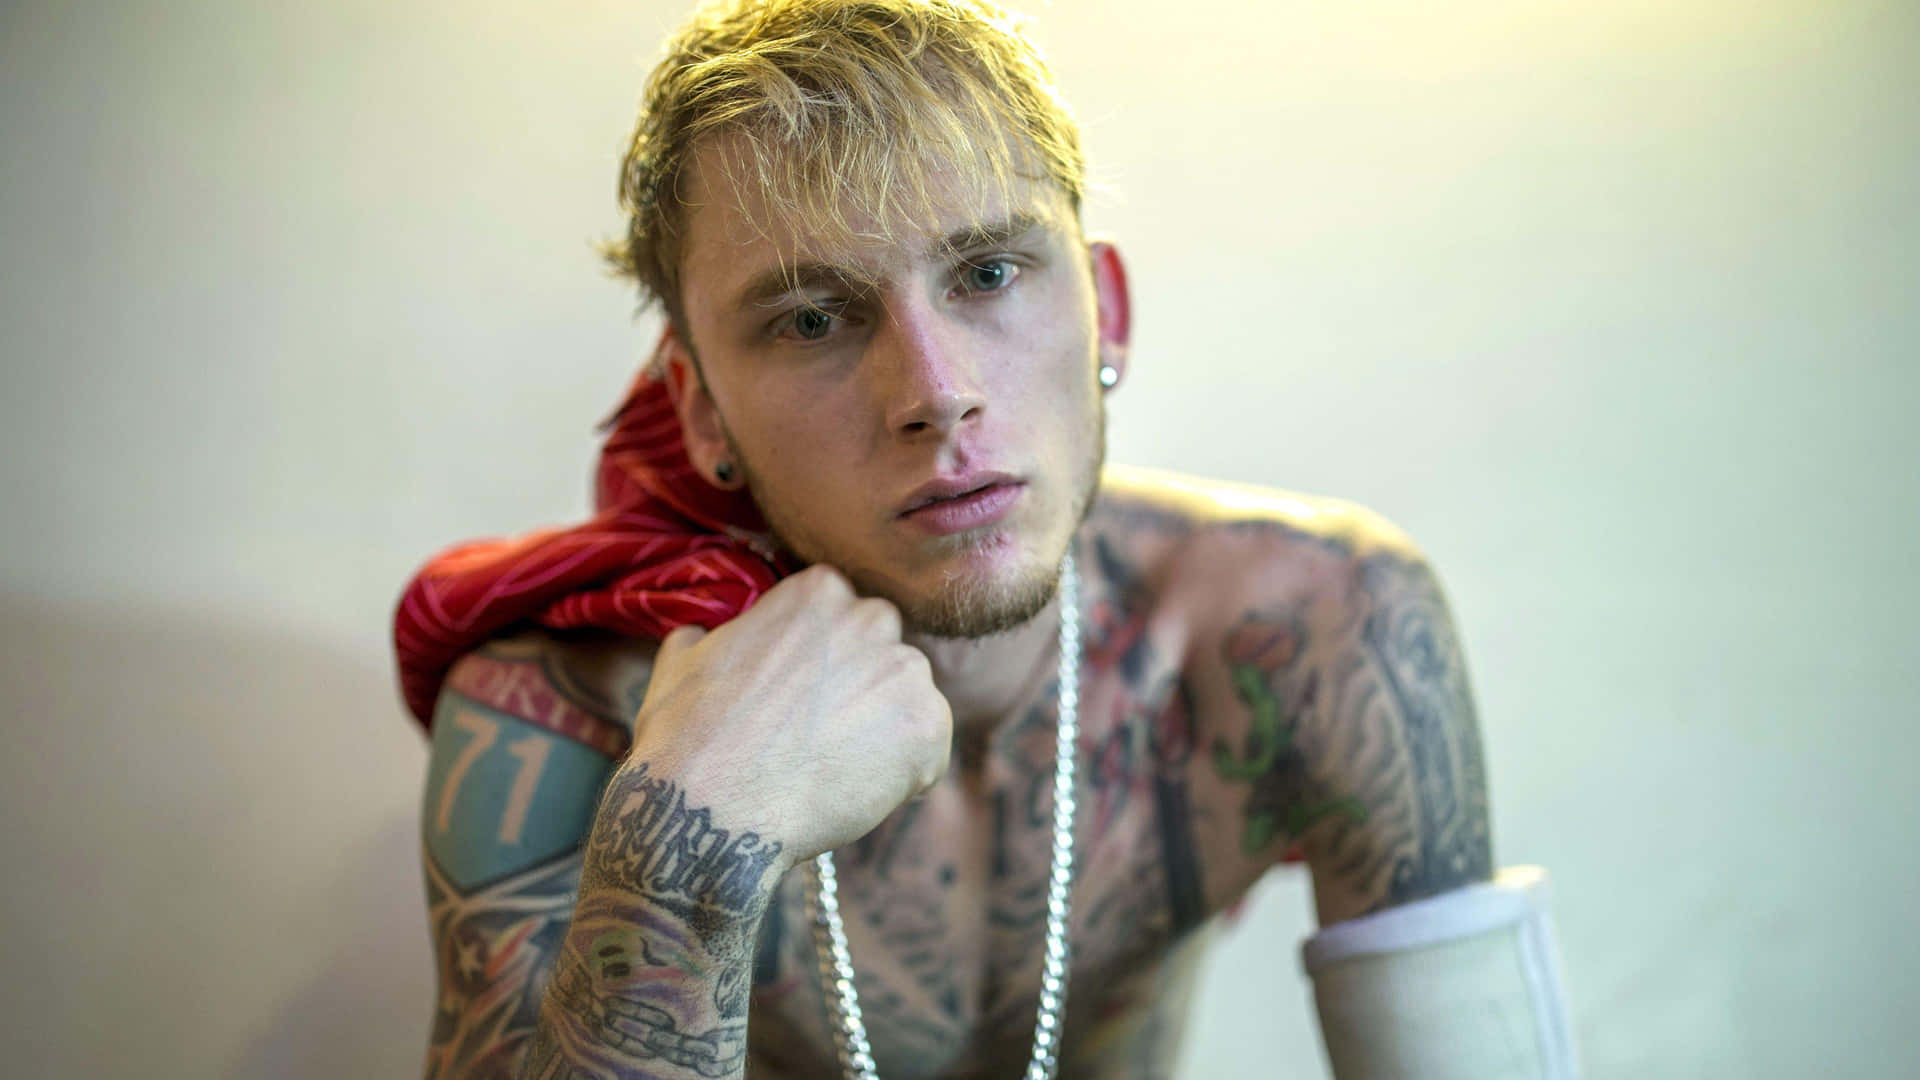 Mgk With Tattoos Background